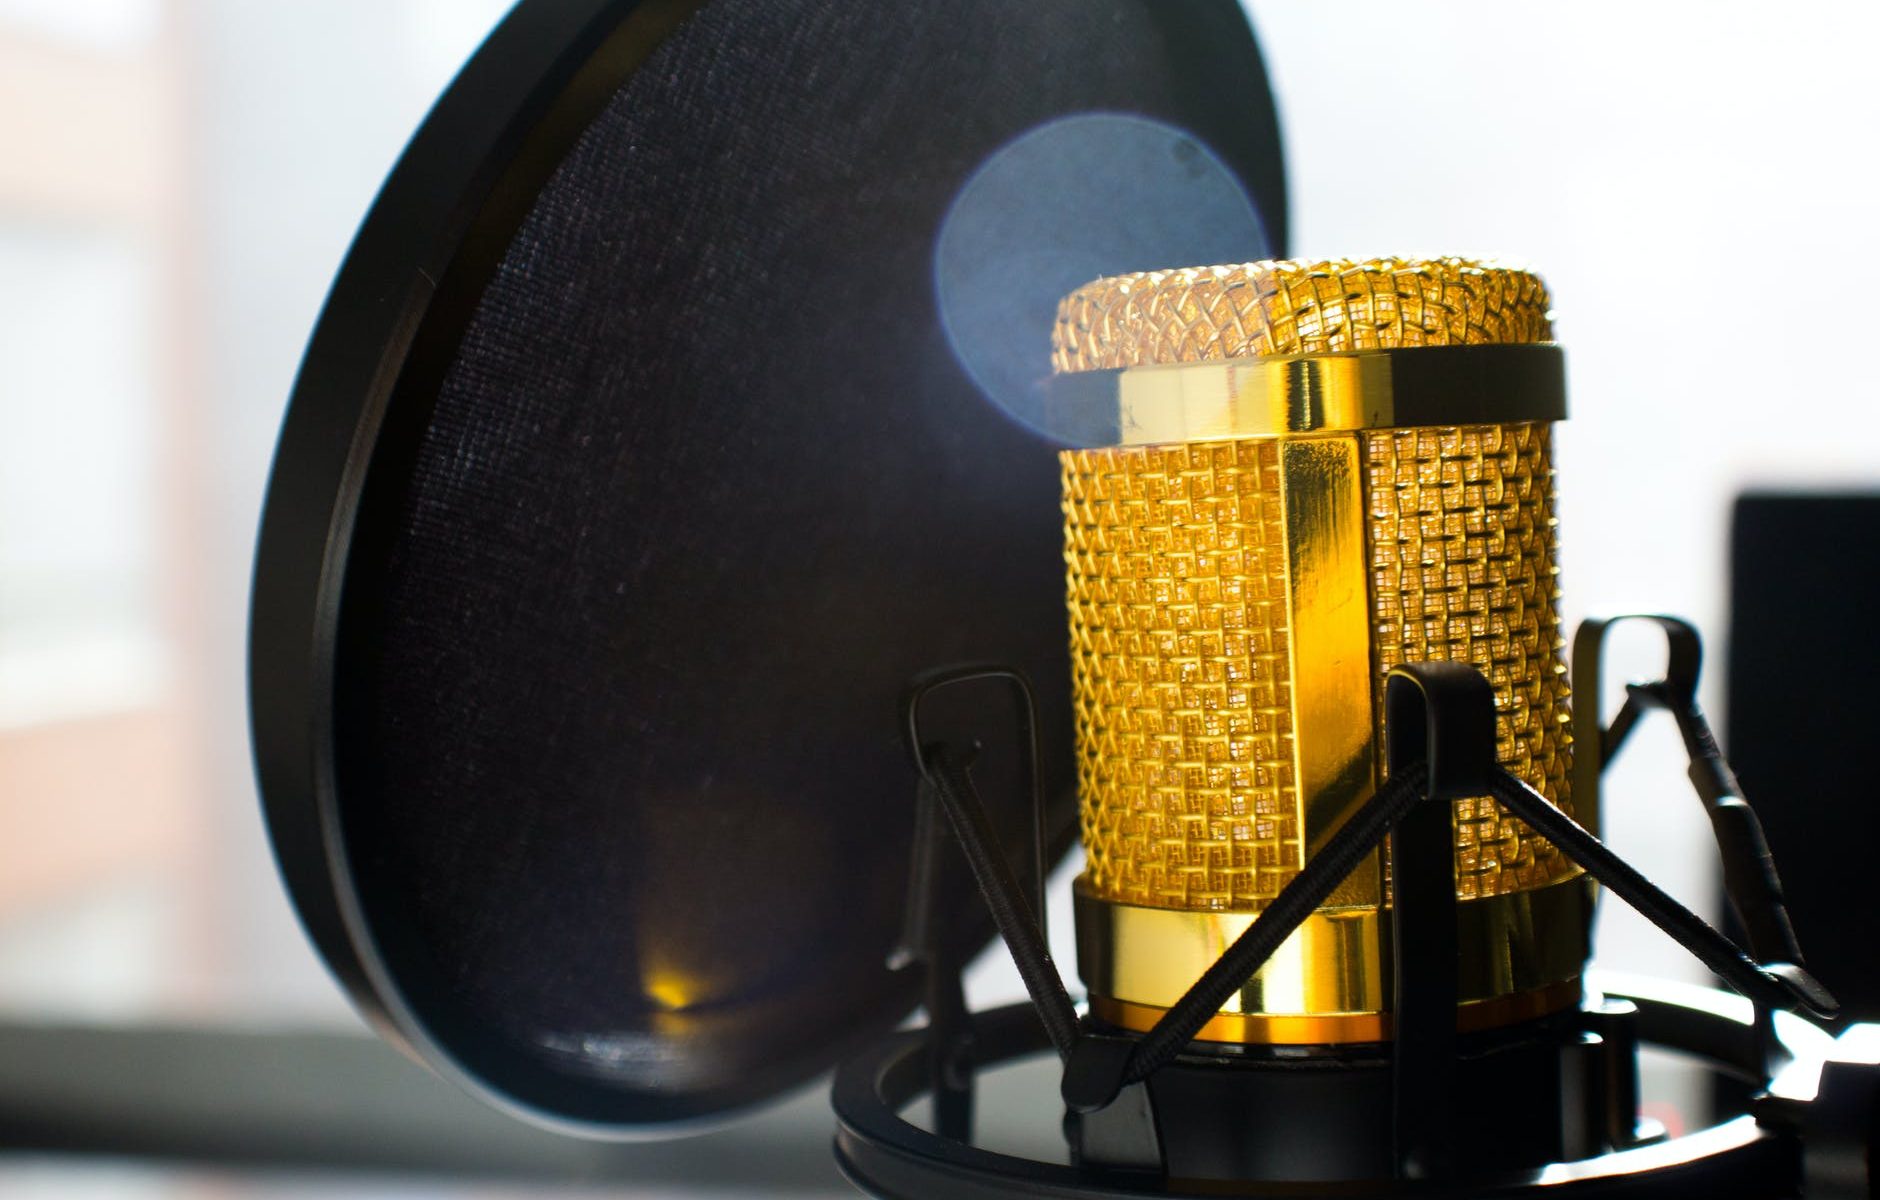 close up photo of gold colored and black condenser microphone